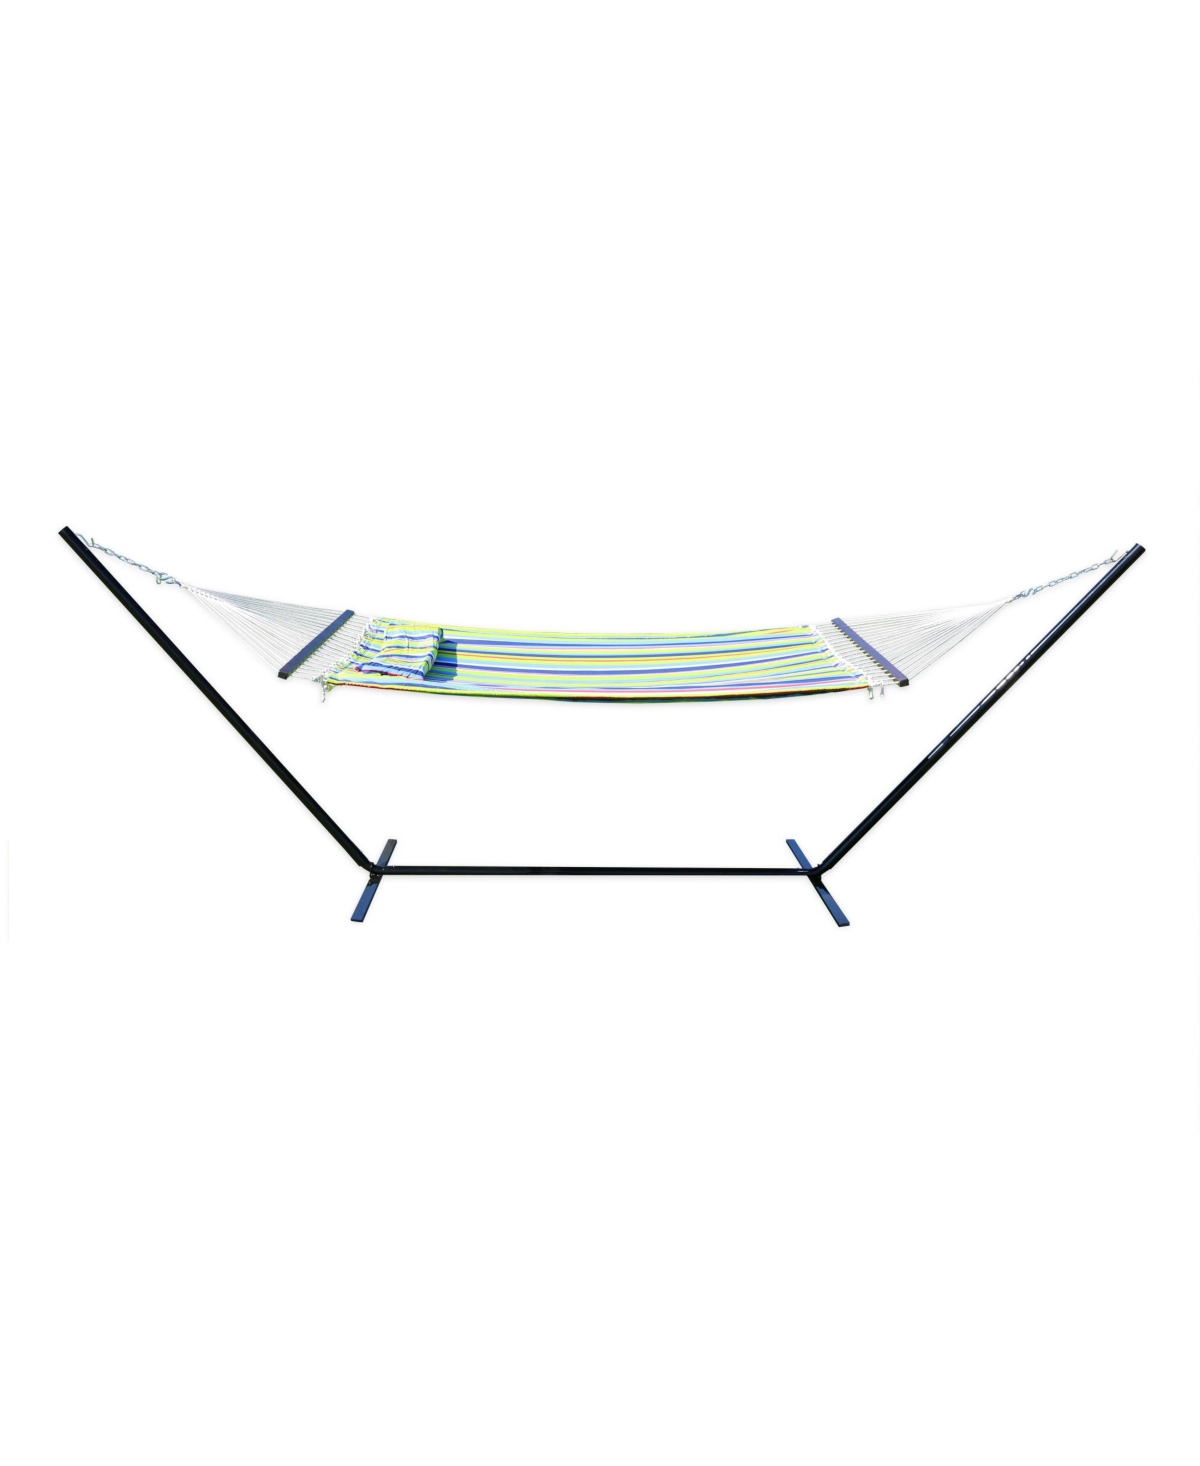 Antigua Double Polyester Hammock with Stand - Black